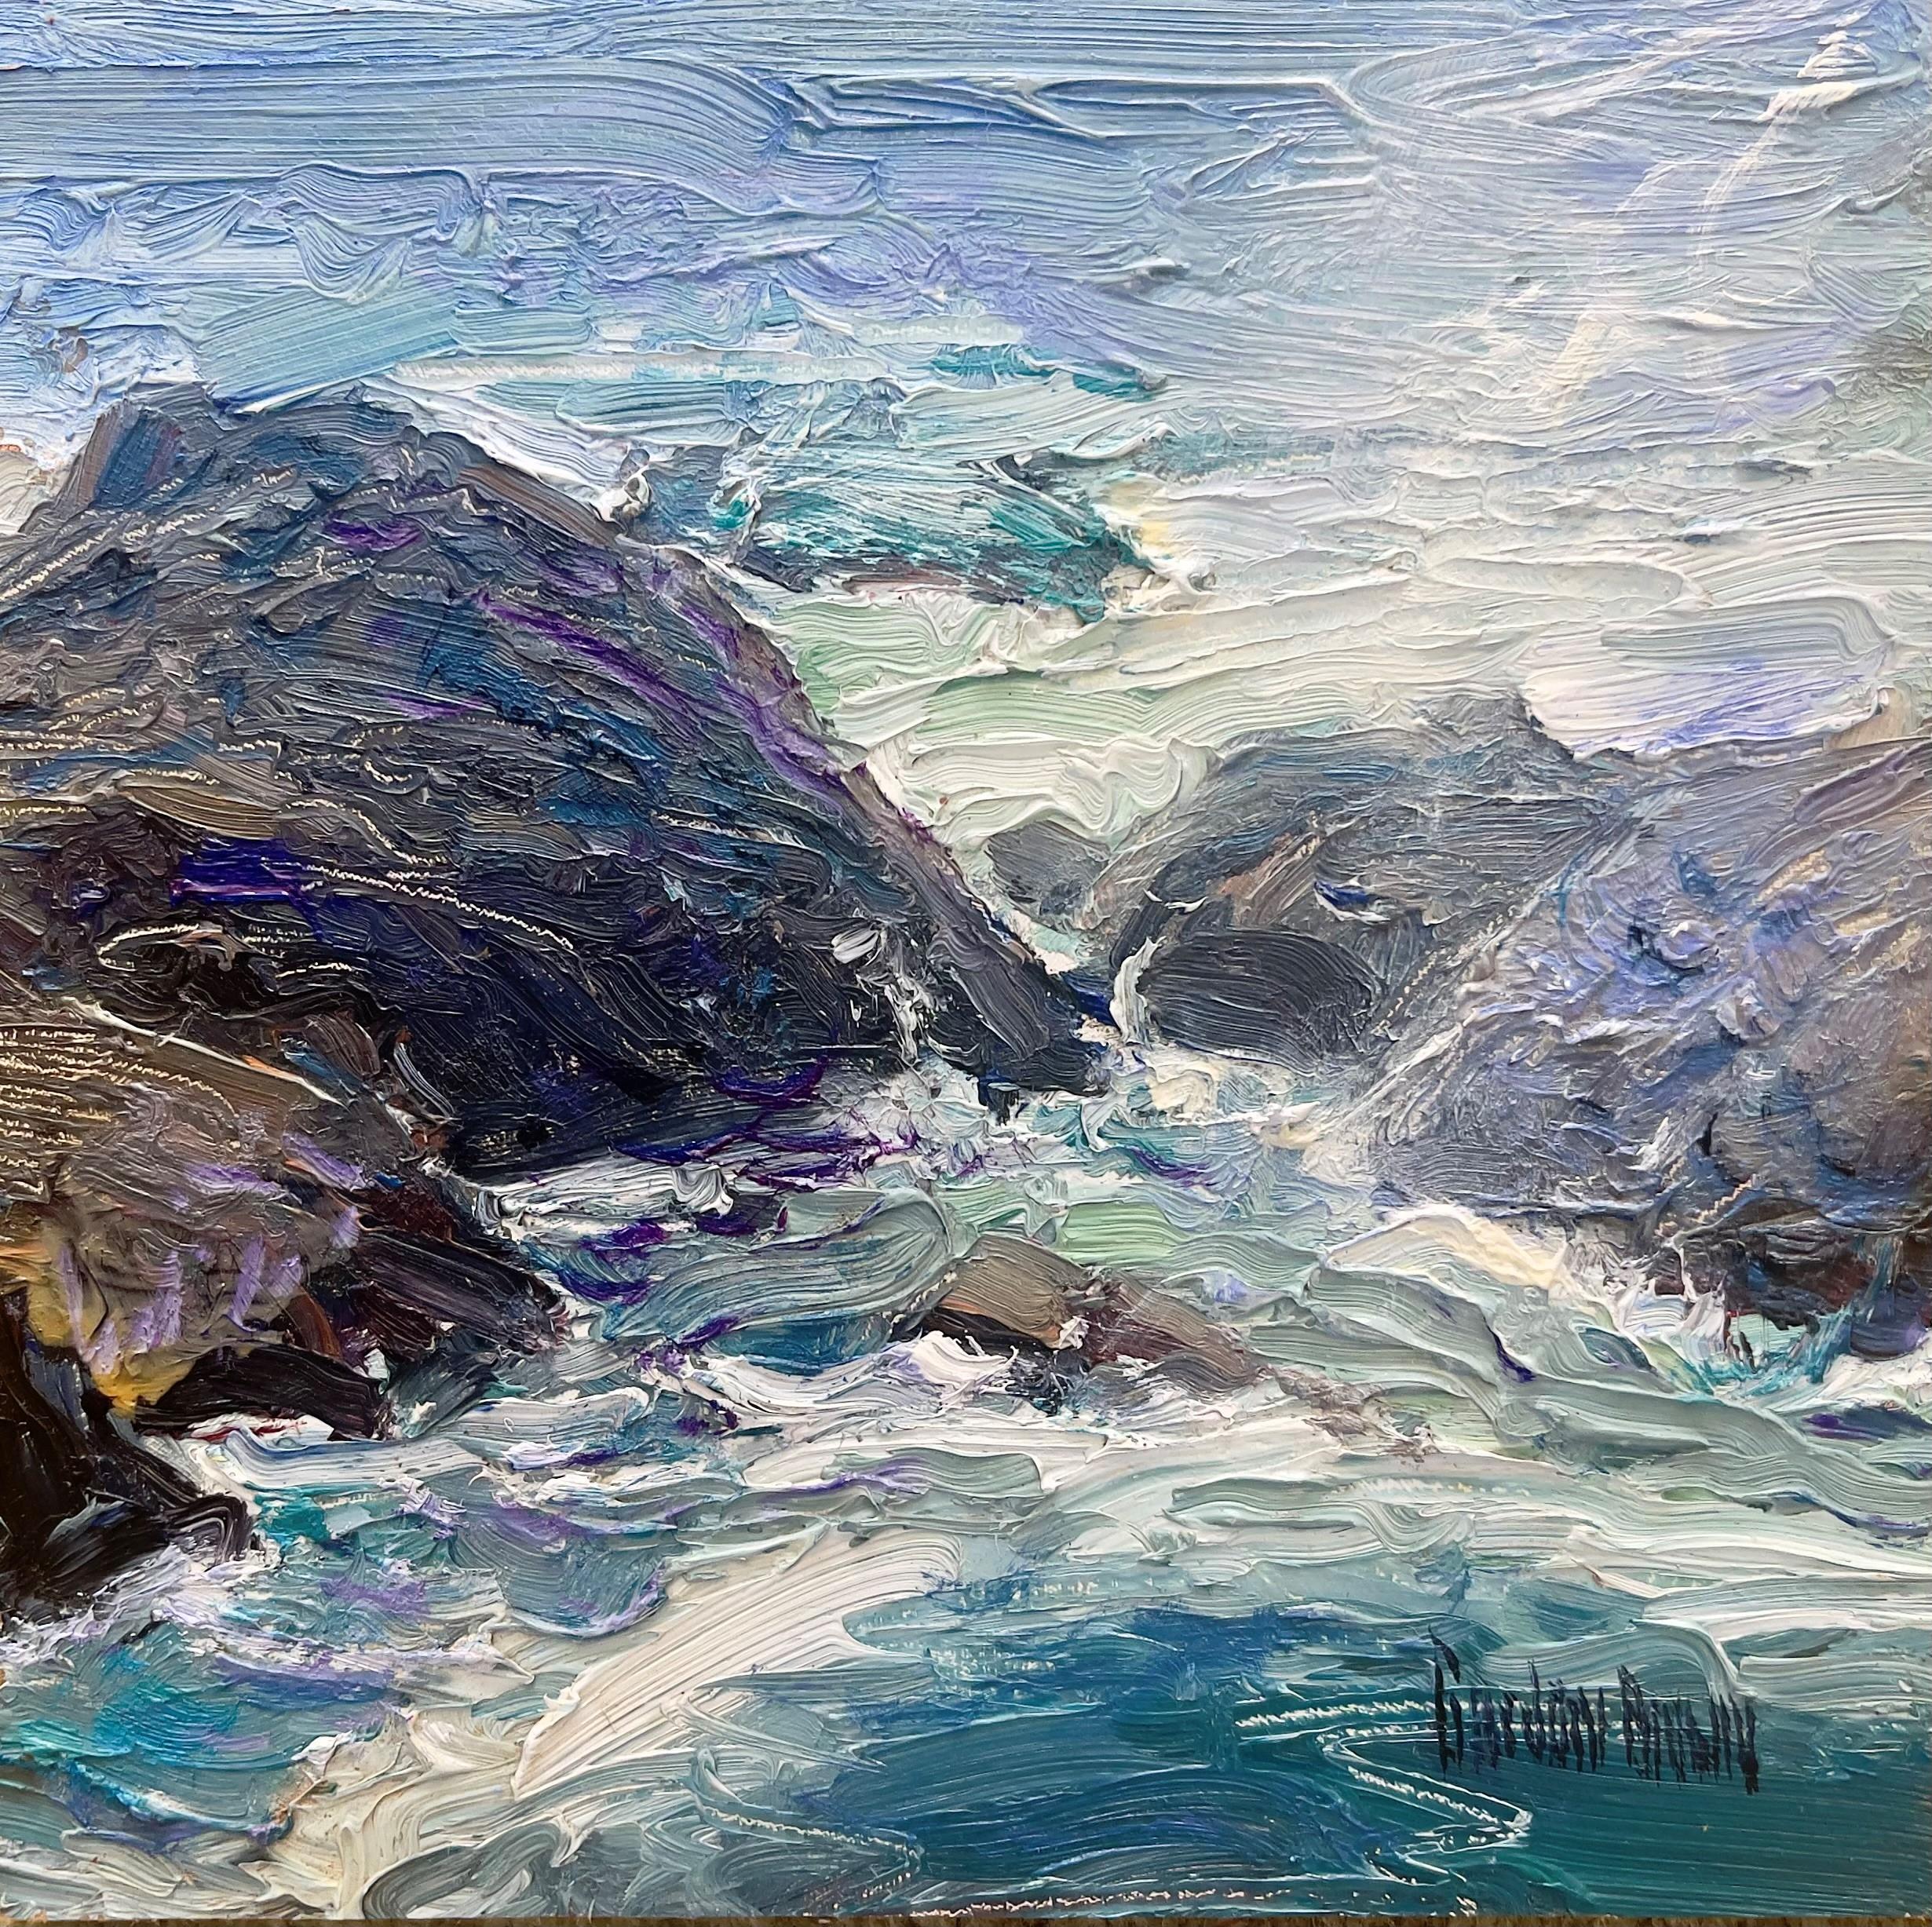 Gordon Brown Figurative Painting - "Pacific" Oil Painting